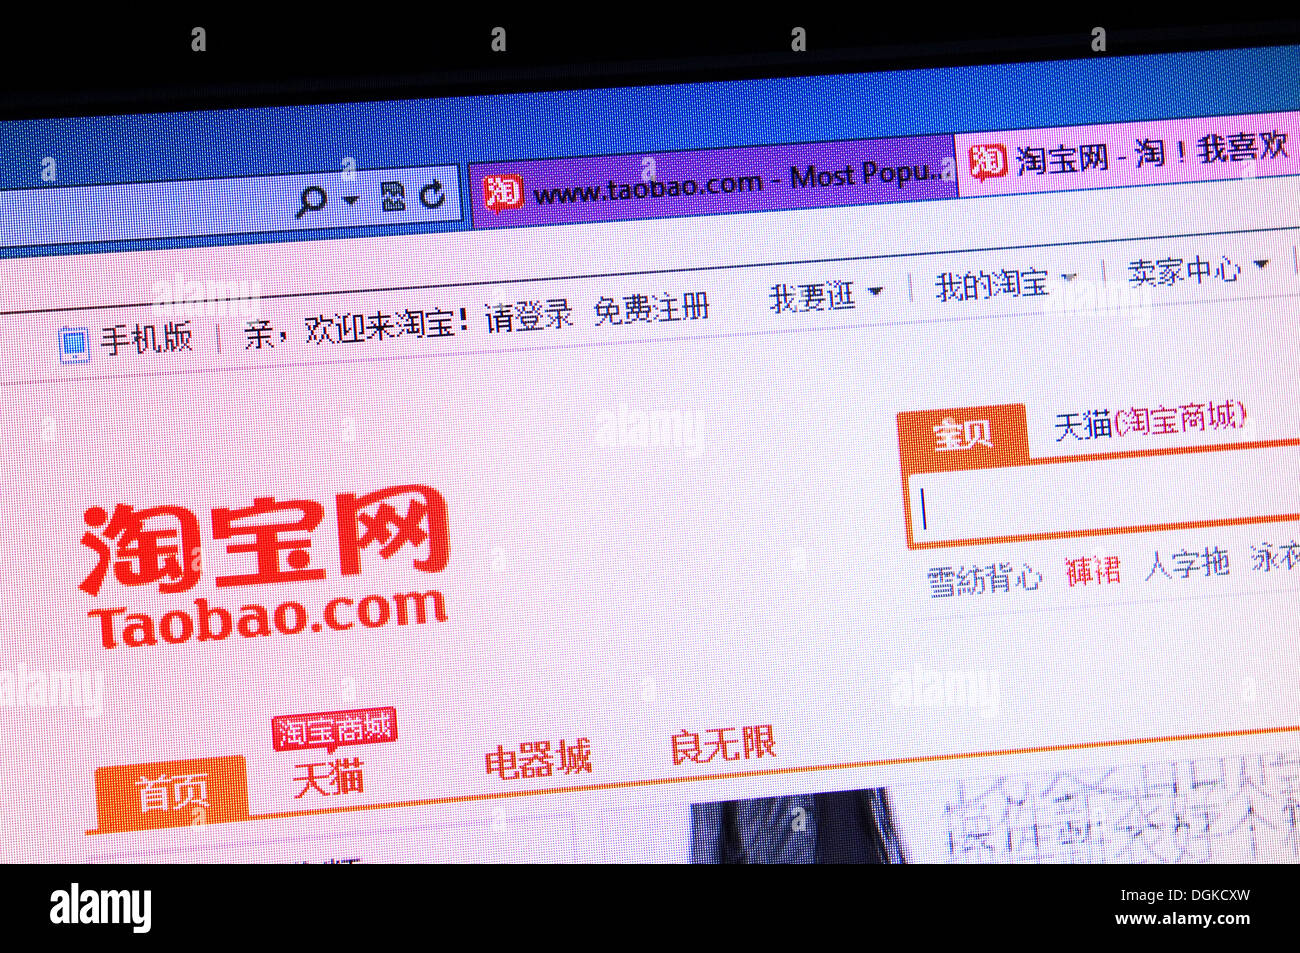 Taobao.com Chinese online shopping site Stock Photo